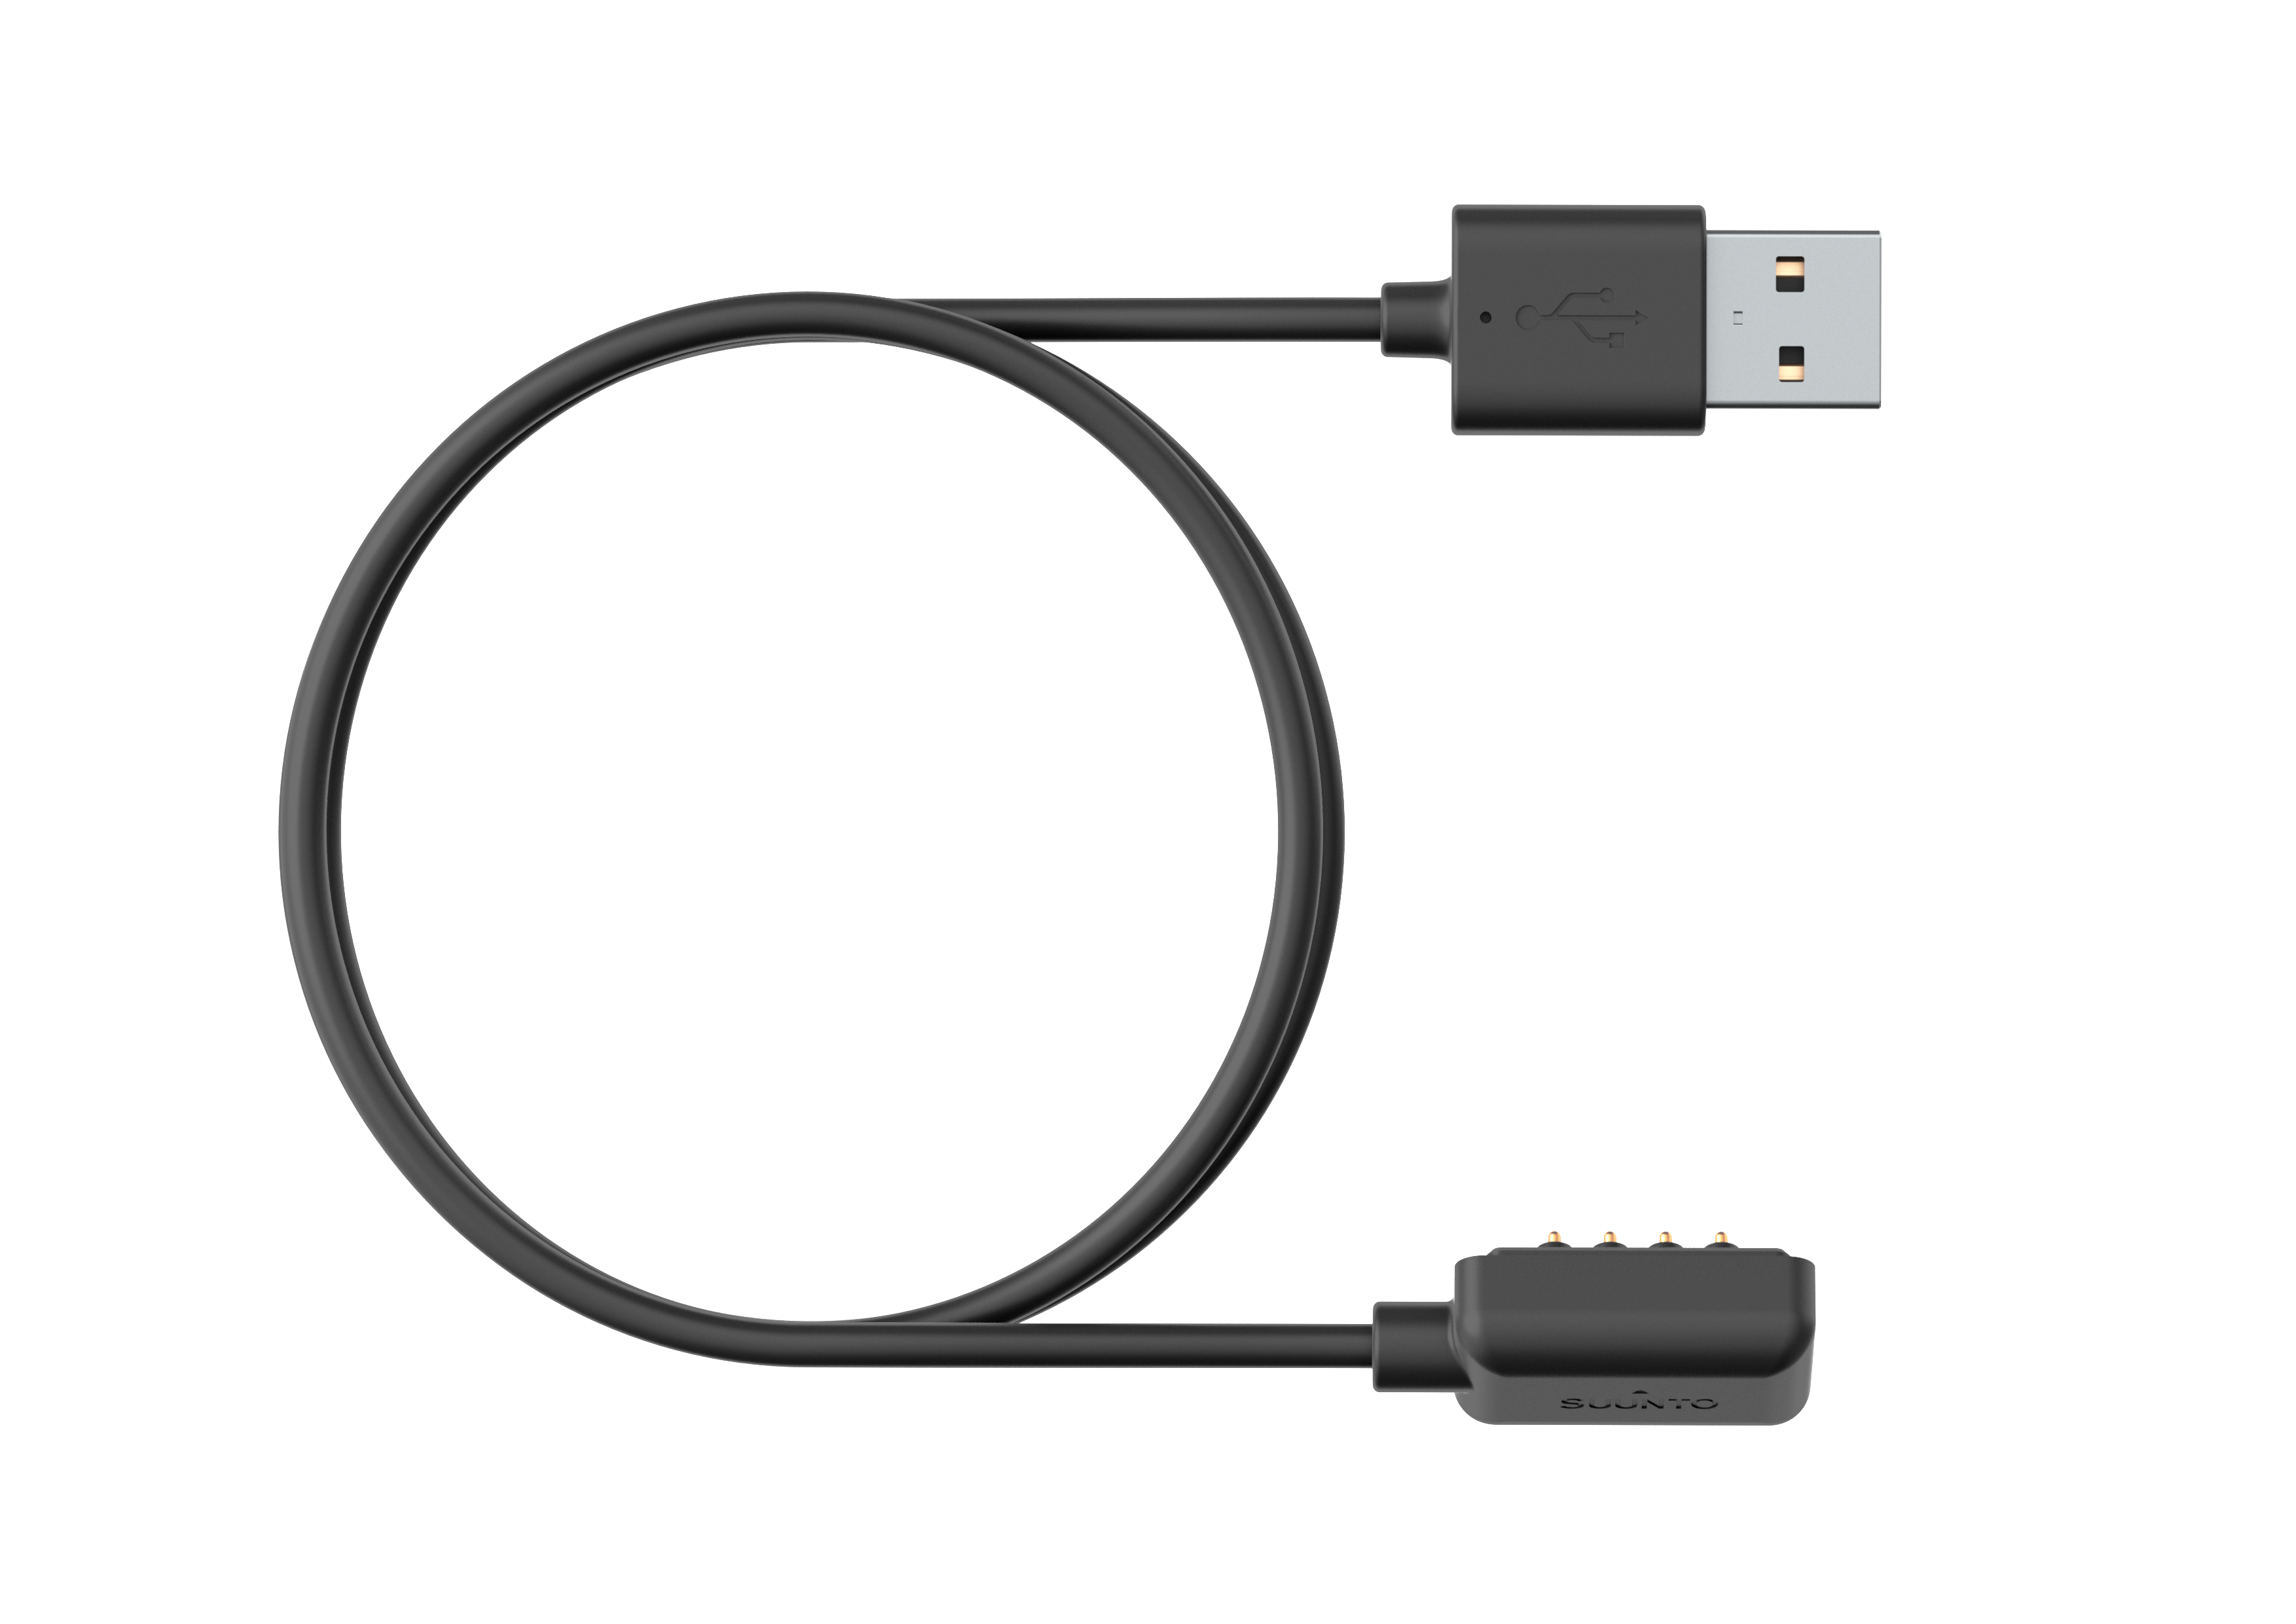 Illusie Peave vijand Black magnetic USB cable - charge and update your Suunto watch